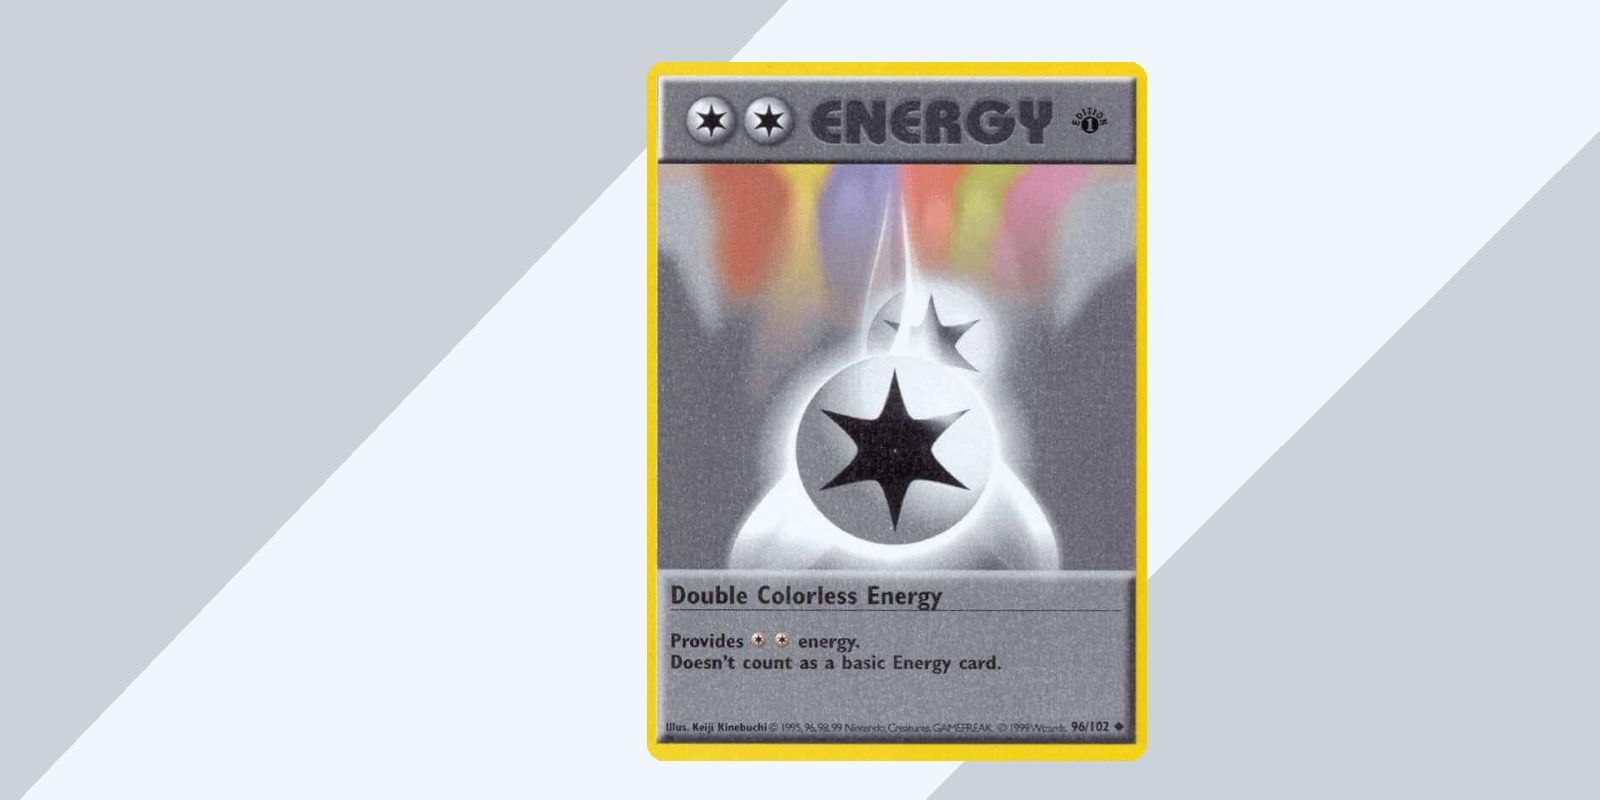 Base Set Double Colorless Energy from the Pokémon TCG.